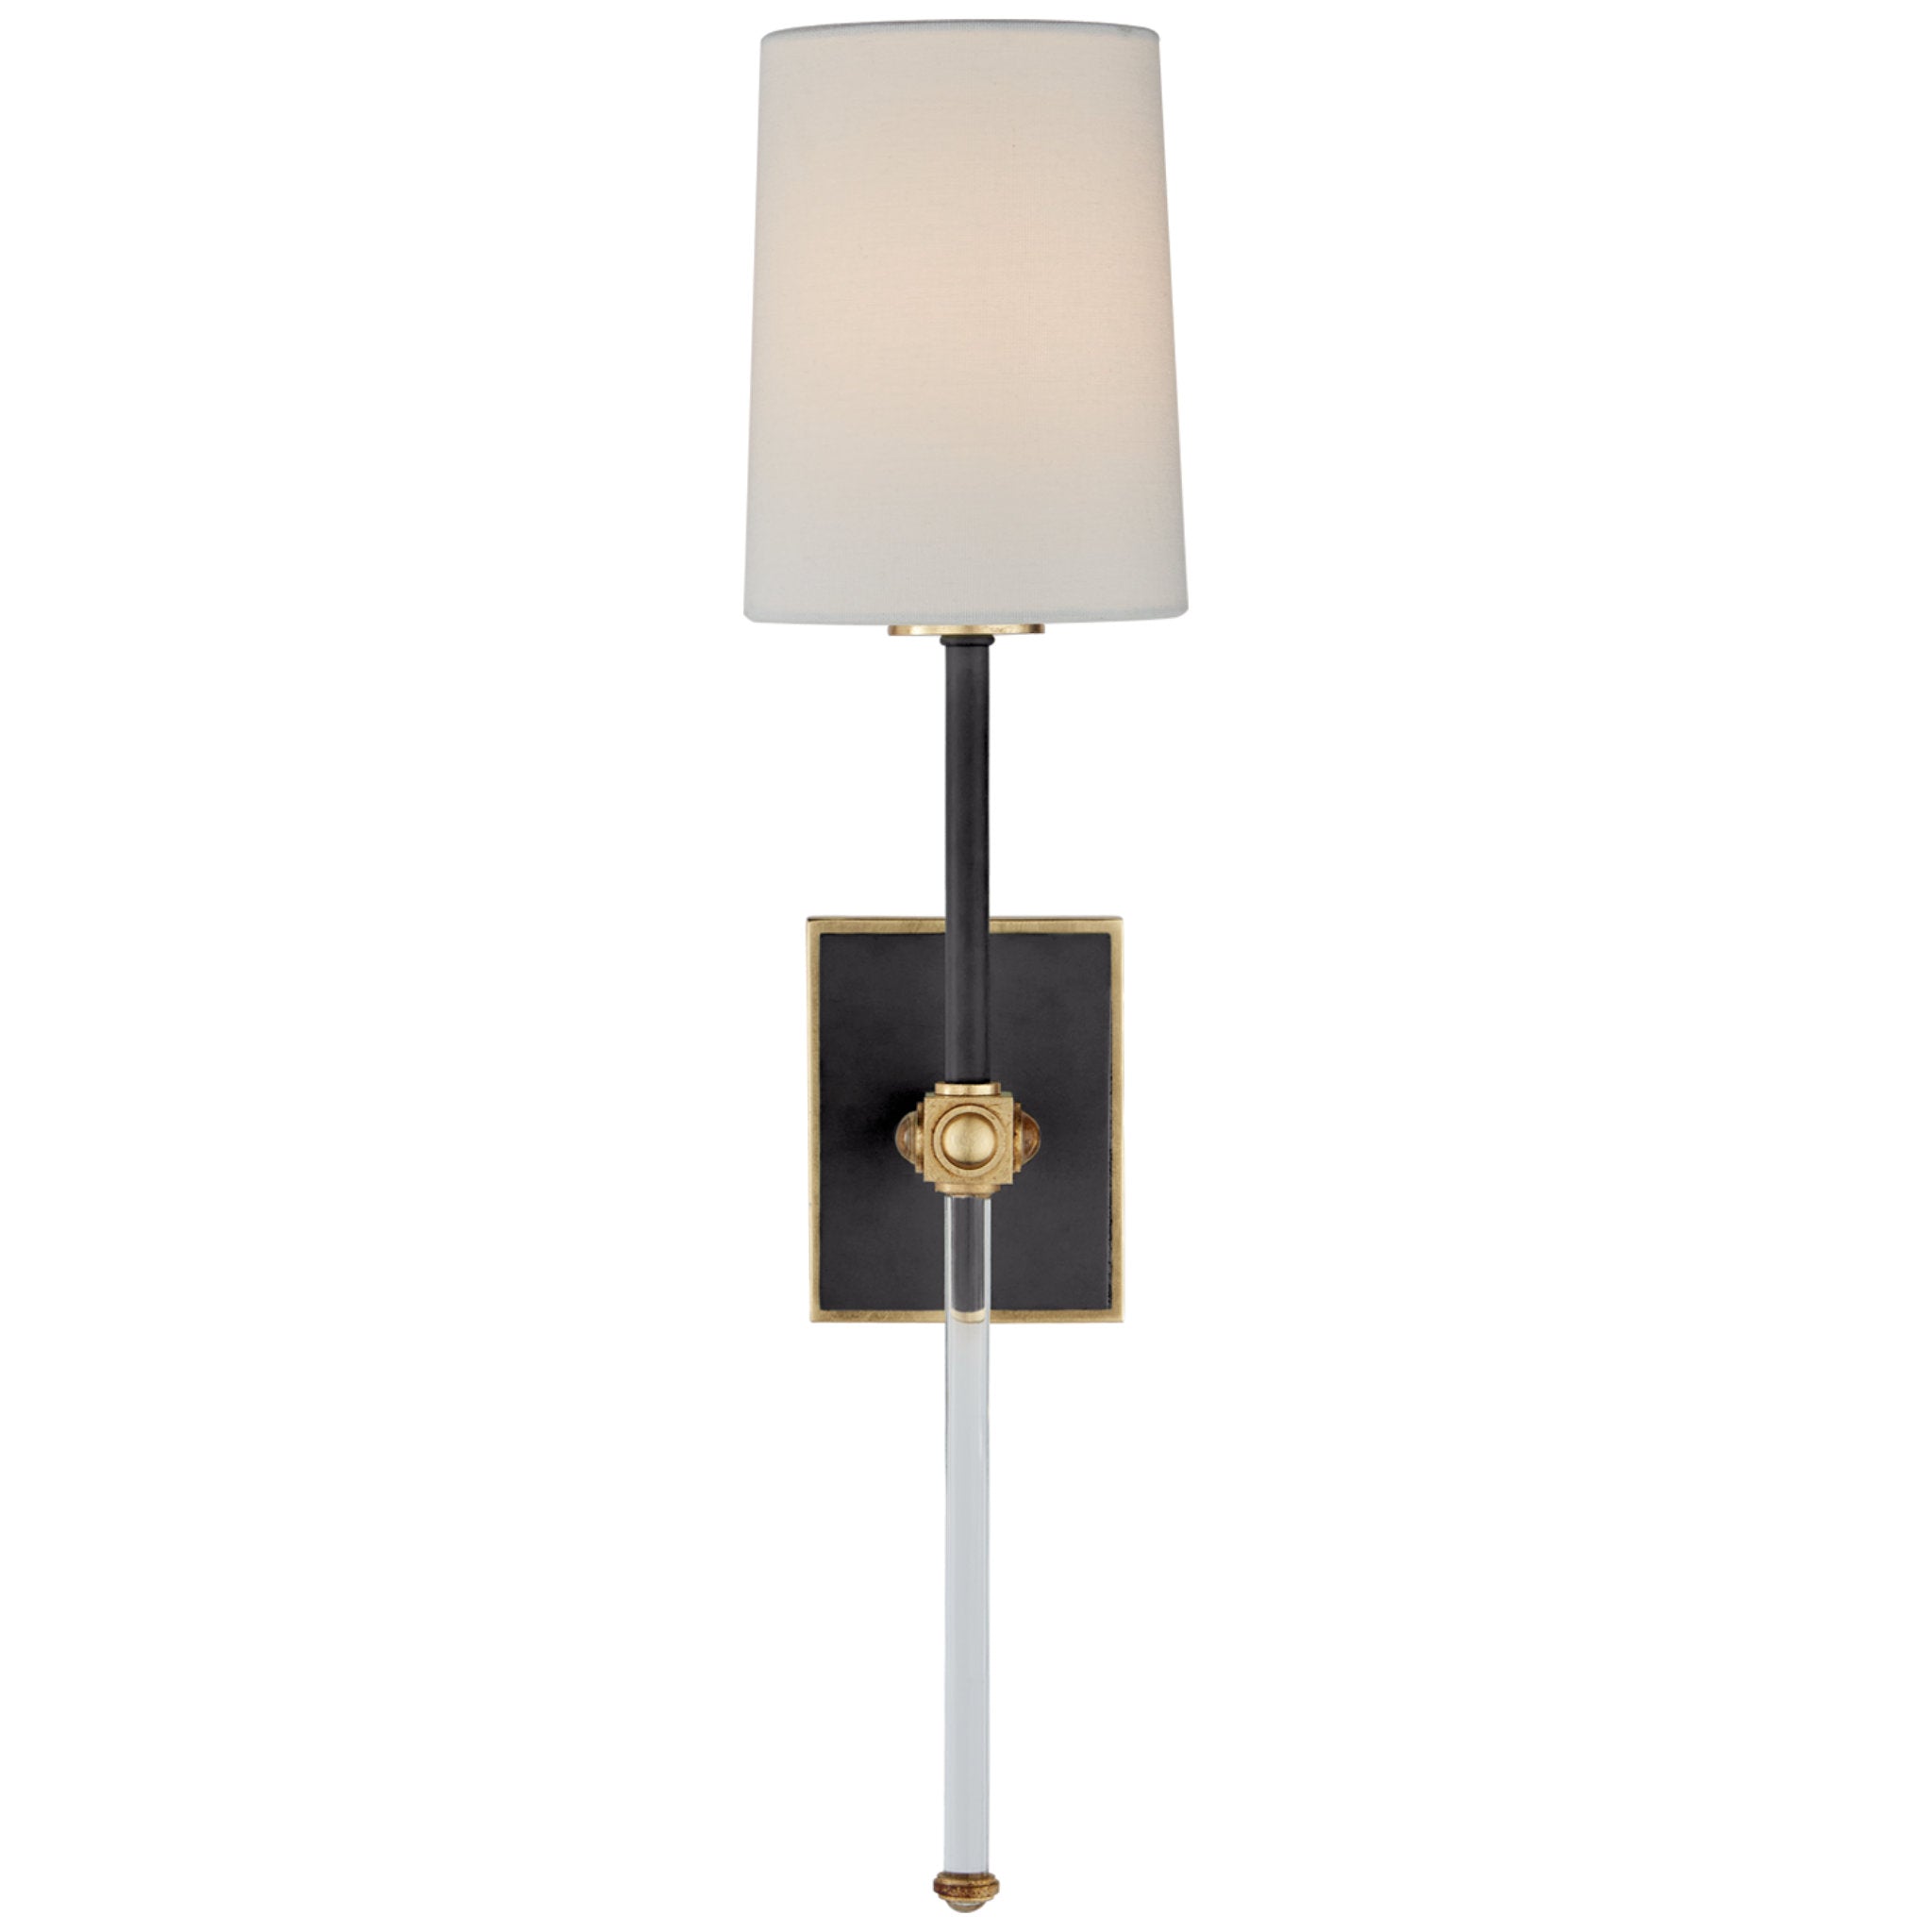 Julie Neill Lucia Medium Tail Sconce in Matte Black and Crystal with Linen Shade